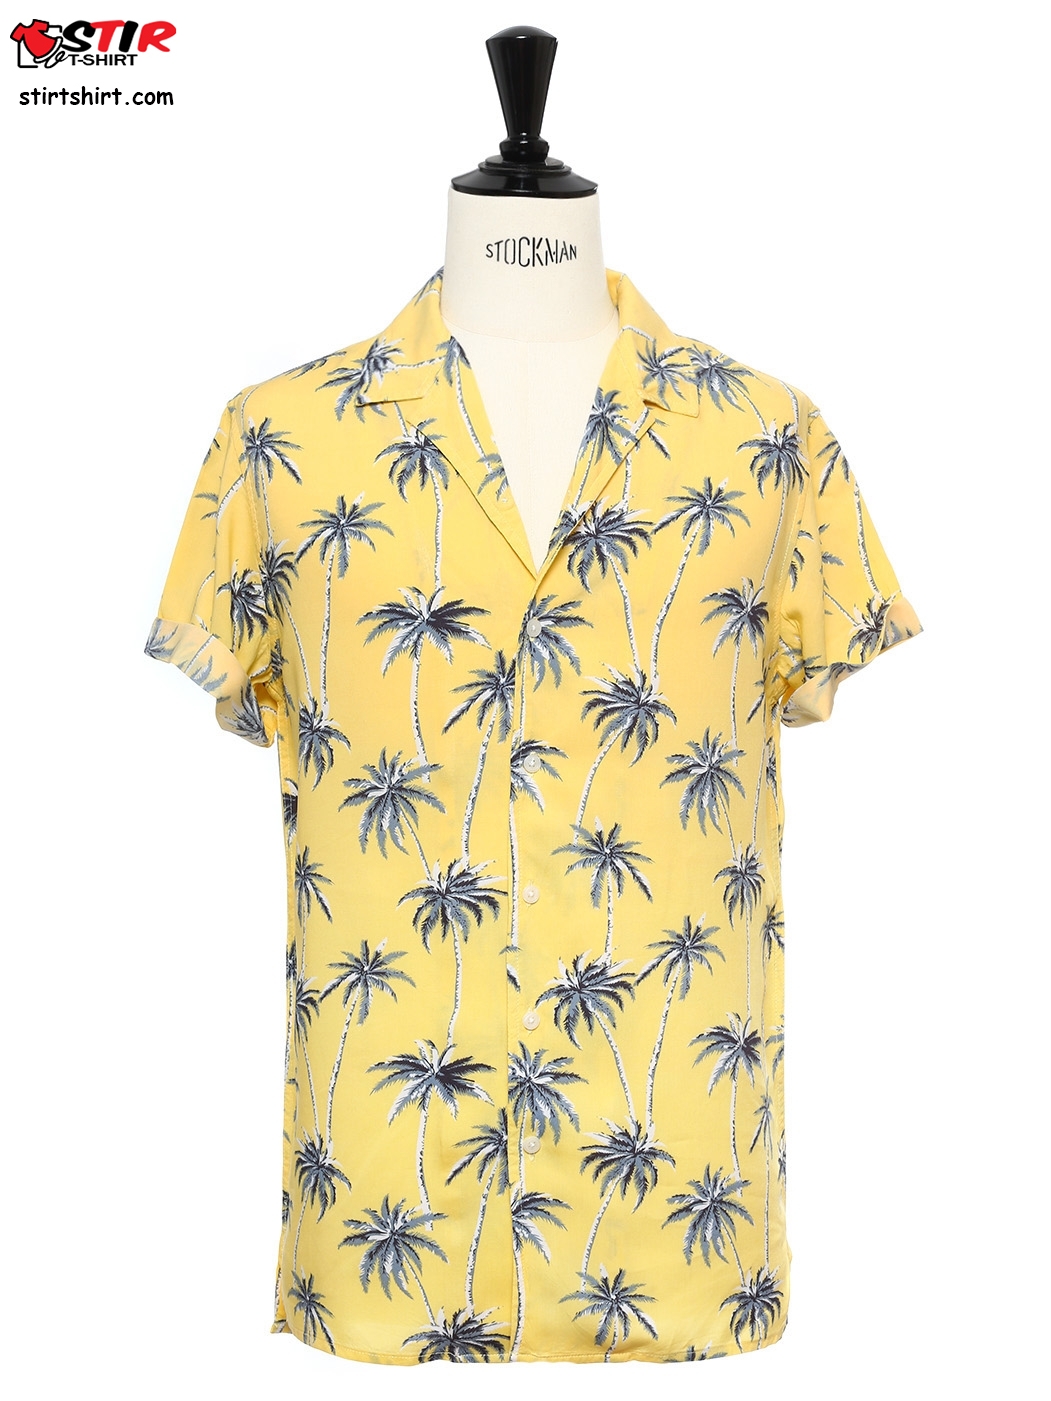 Boutique Yellow Cotton Printed With Blue Palm Trees Short Sleeved Hawaiian Shirt  Blue And Yellow 